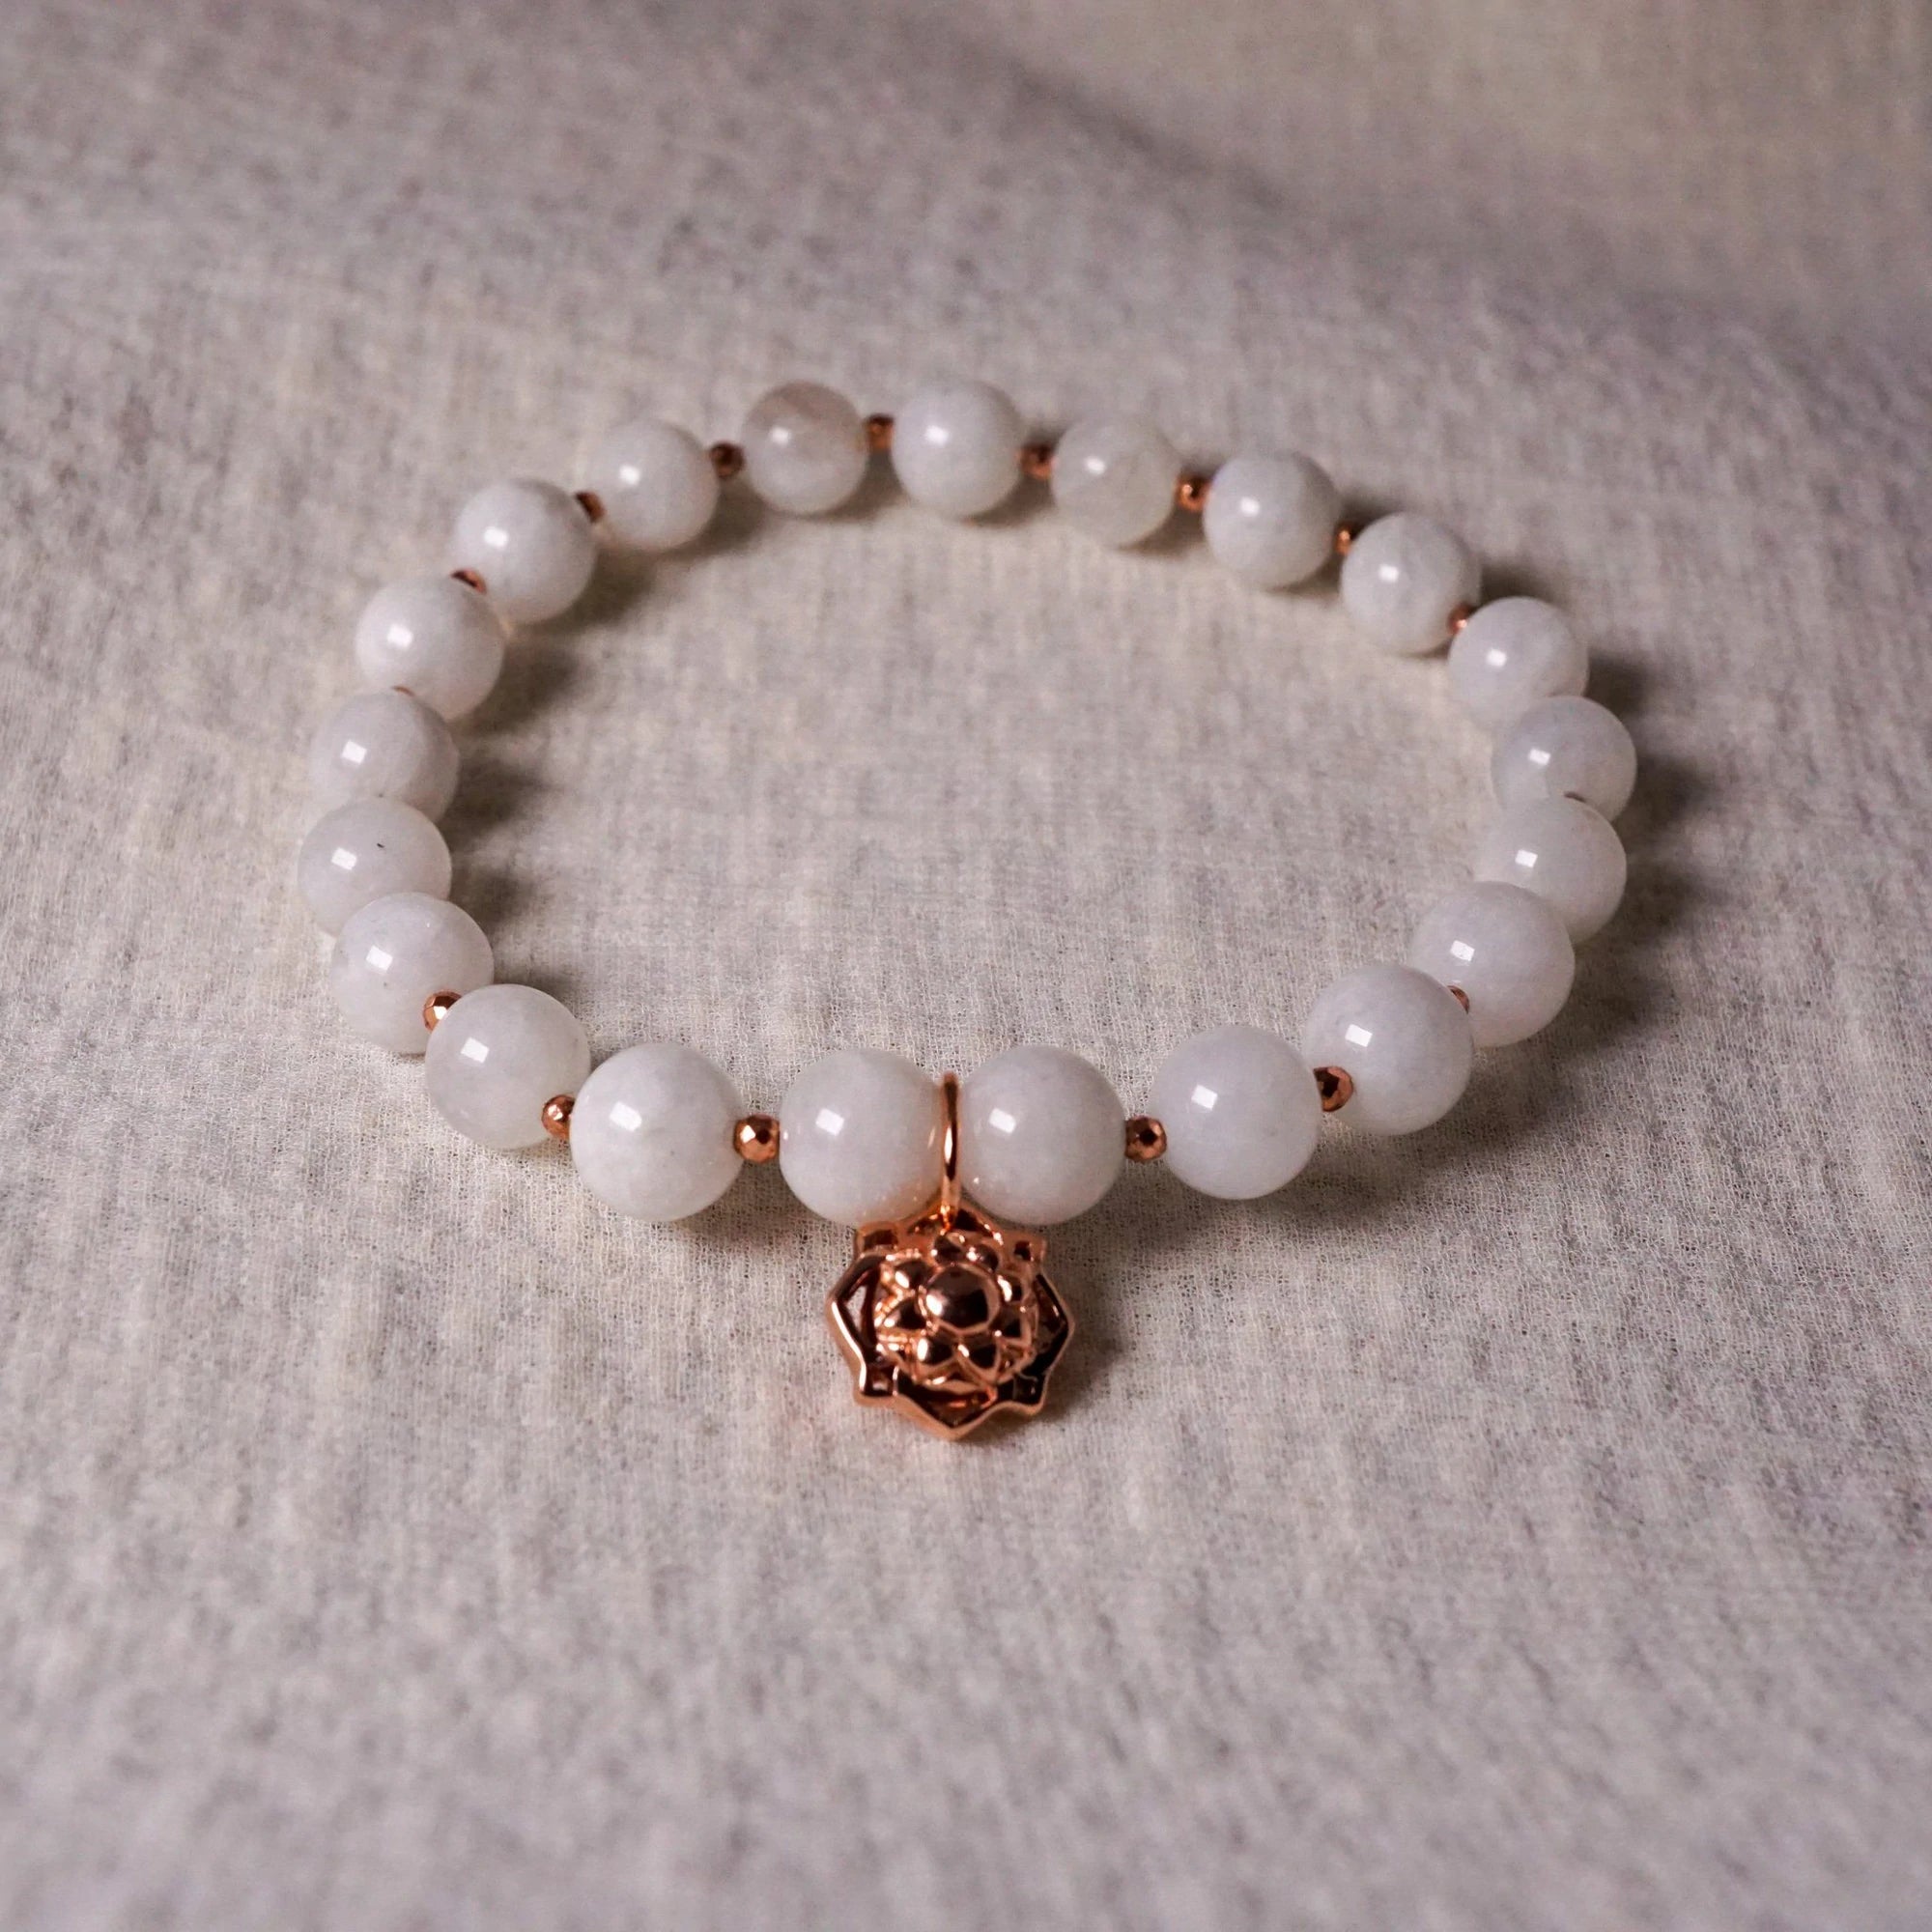 Garden of Desire - Embrace Rainbow Moonstone Bracelet The Embrace Rainbow Moonstone Bracelet features the stone of introspection and reflection, Rainbow moonstone is believed to promote tranquillity, stability intuition and inspiration.